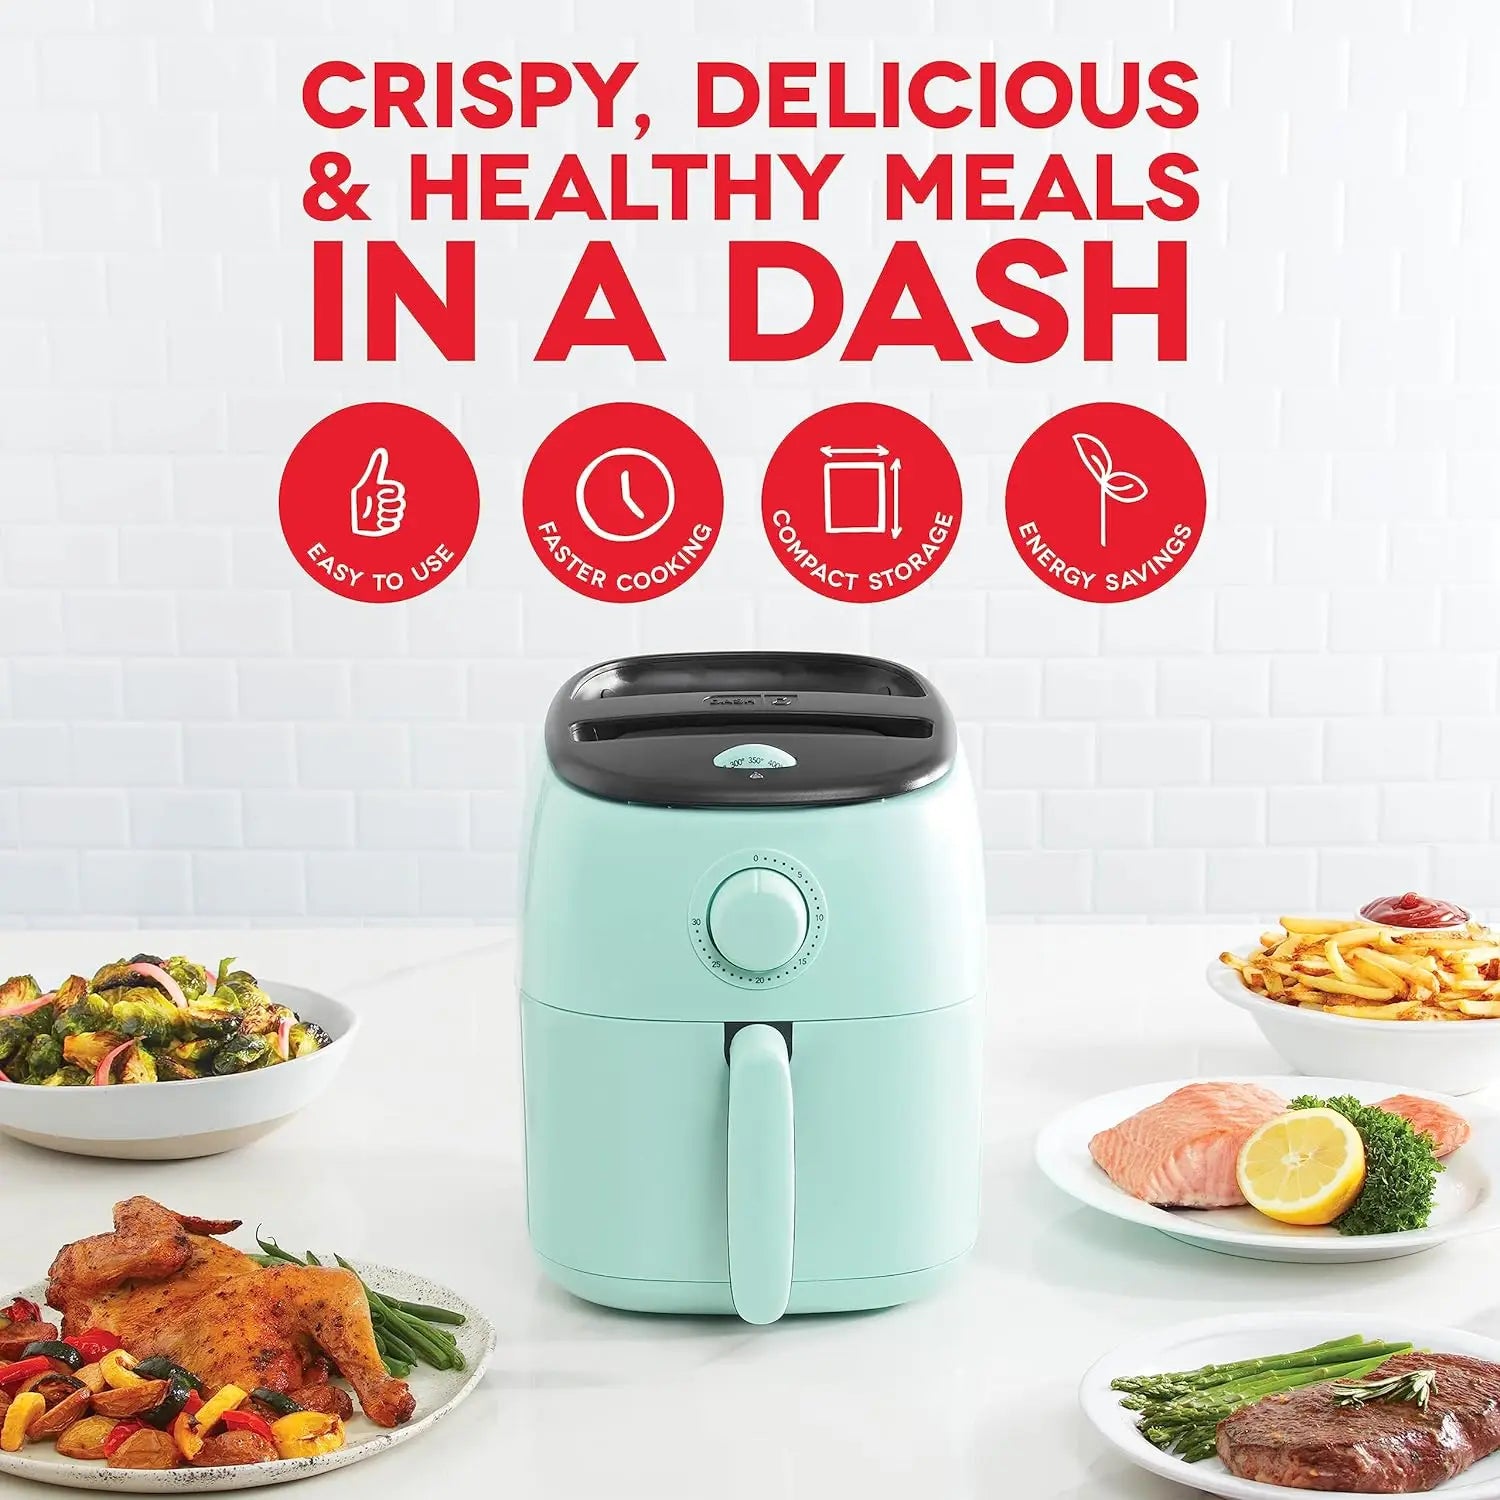 Electric Air Fryer + Oven Cooker with Temperature Control, Non-stick Fry Basket,  Auto Shut Off Feature,2.6 Quart - Teal